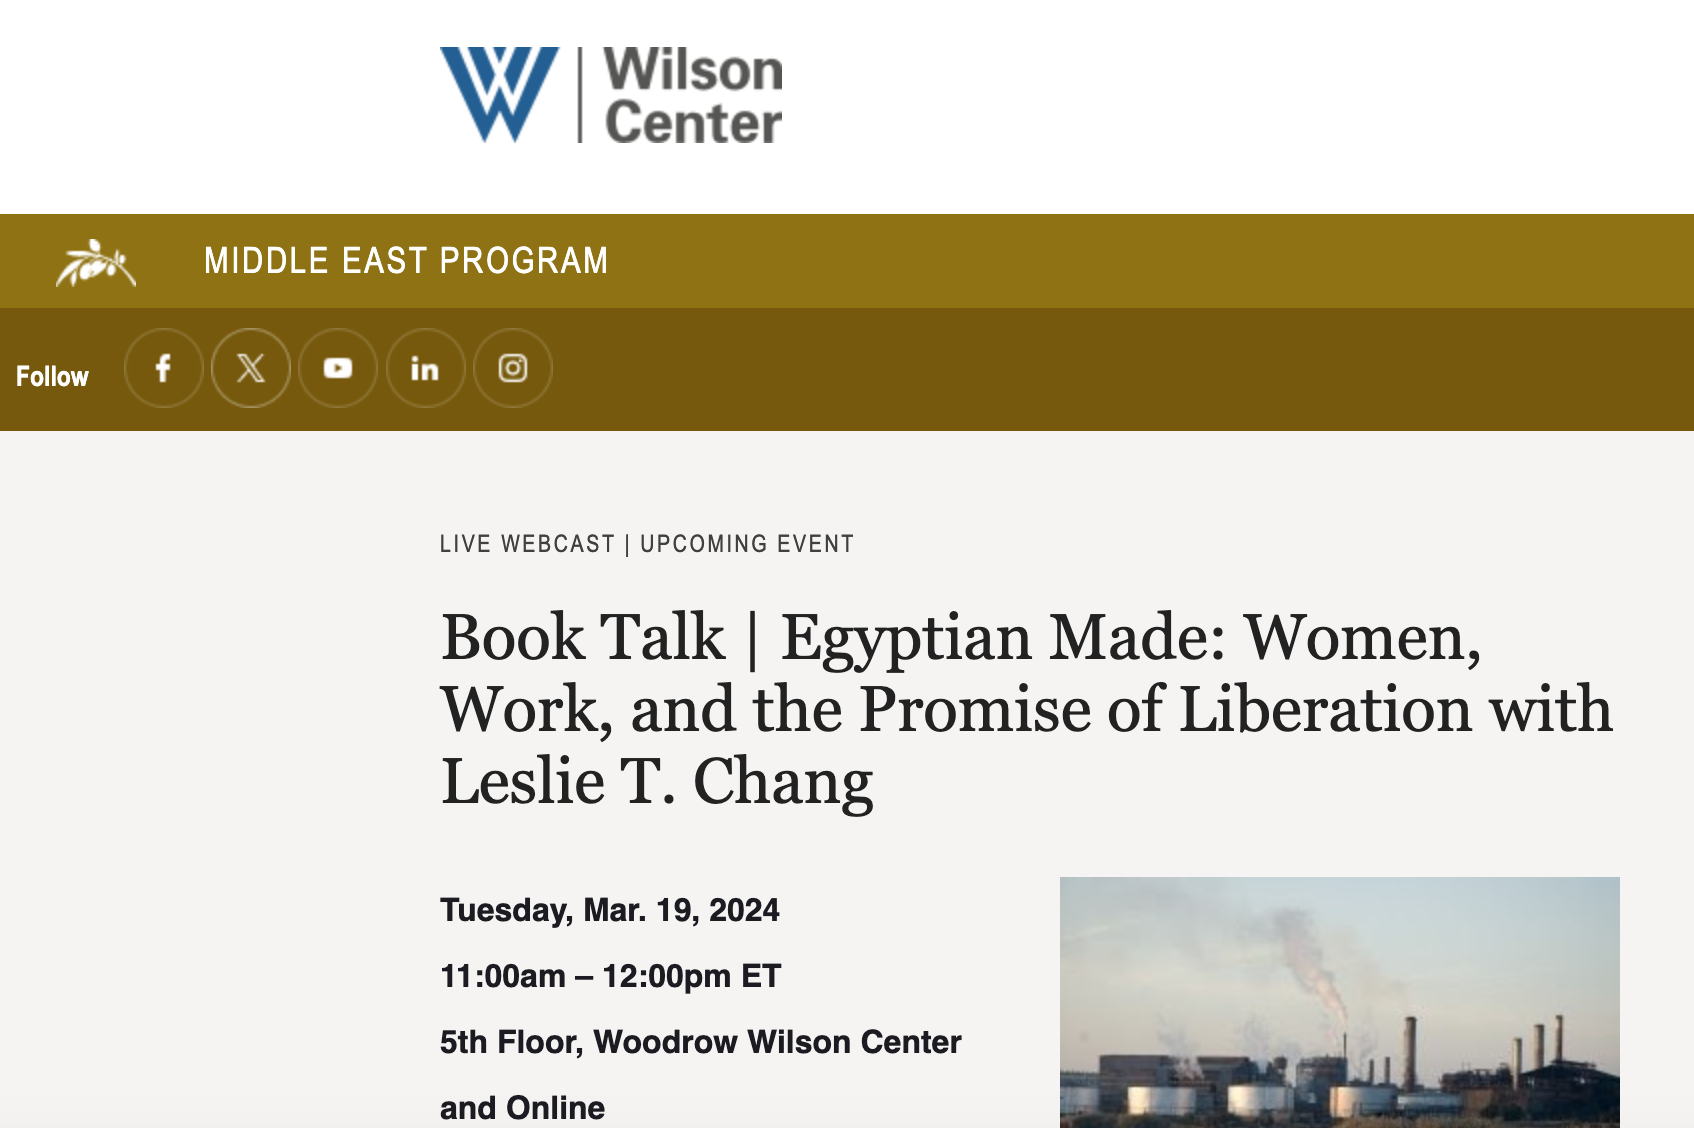 Book Talk | Egyptian Made: Women, Work, and the Promise of Liberation with Leslie T. Chang